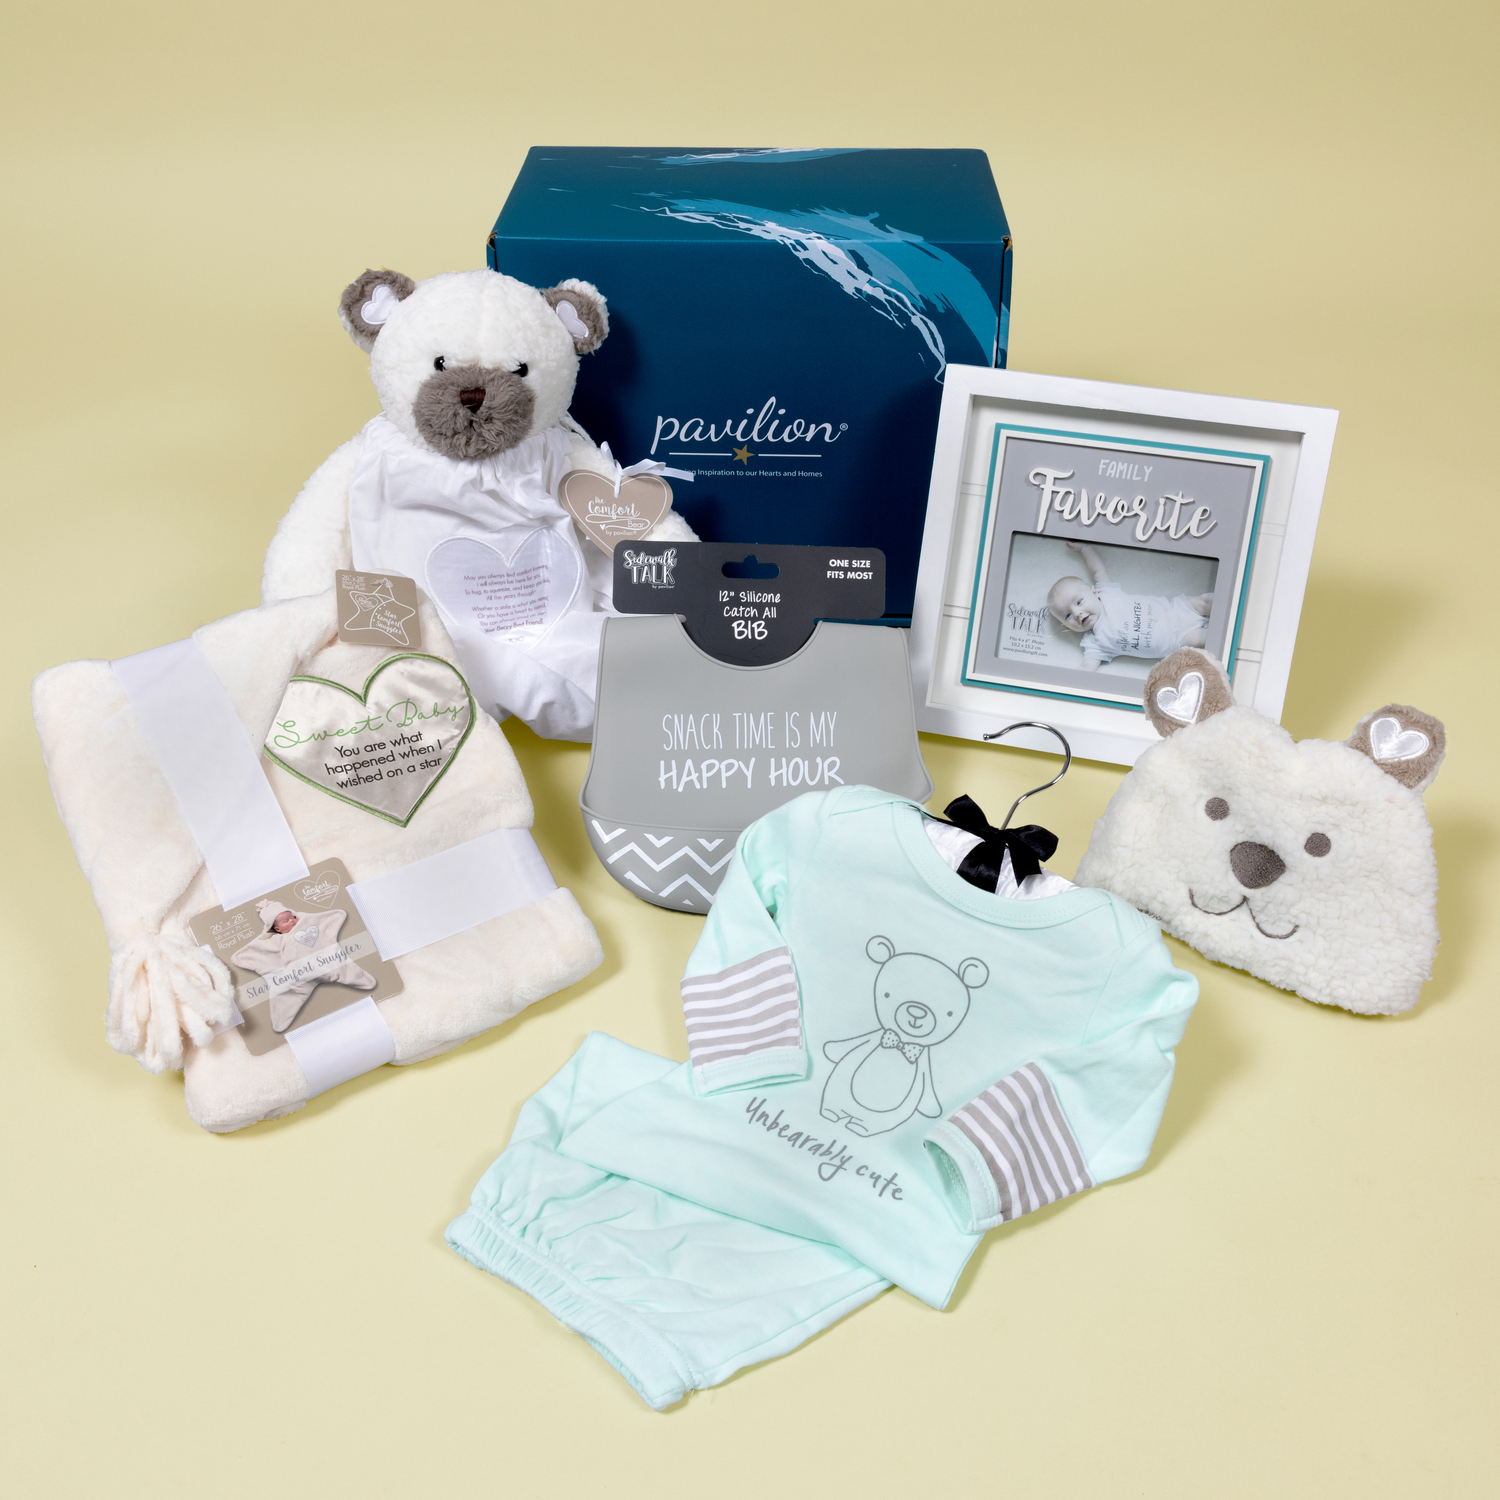 Unisex Baby Gift Box by Packaged With Positivity - Unisex Baby Gift Box - $139.00 Value